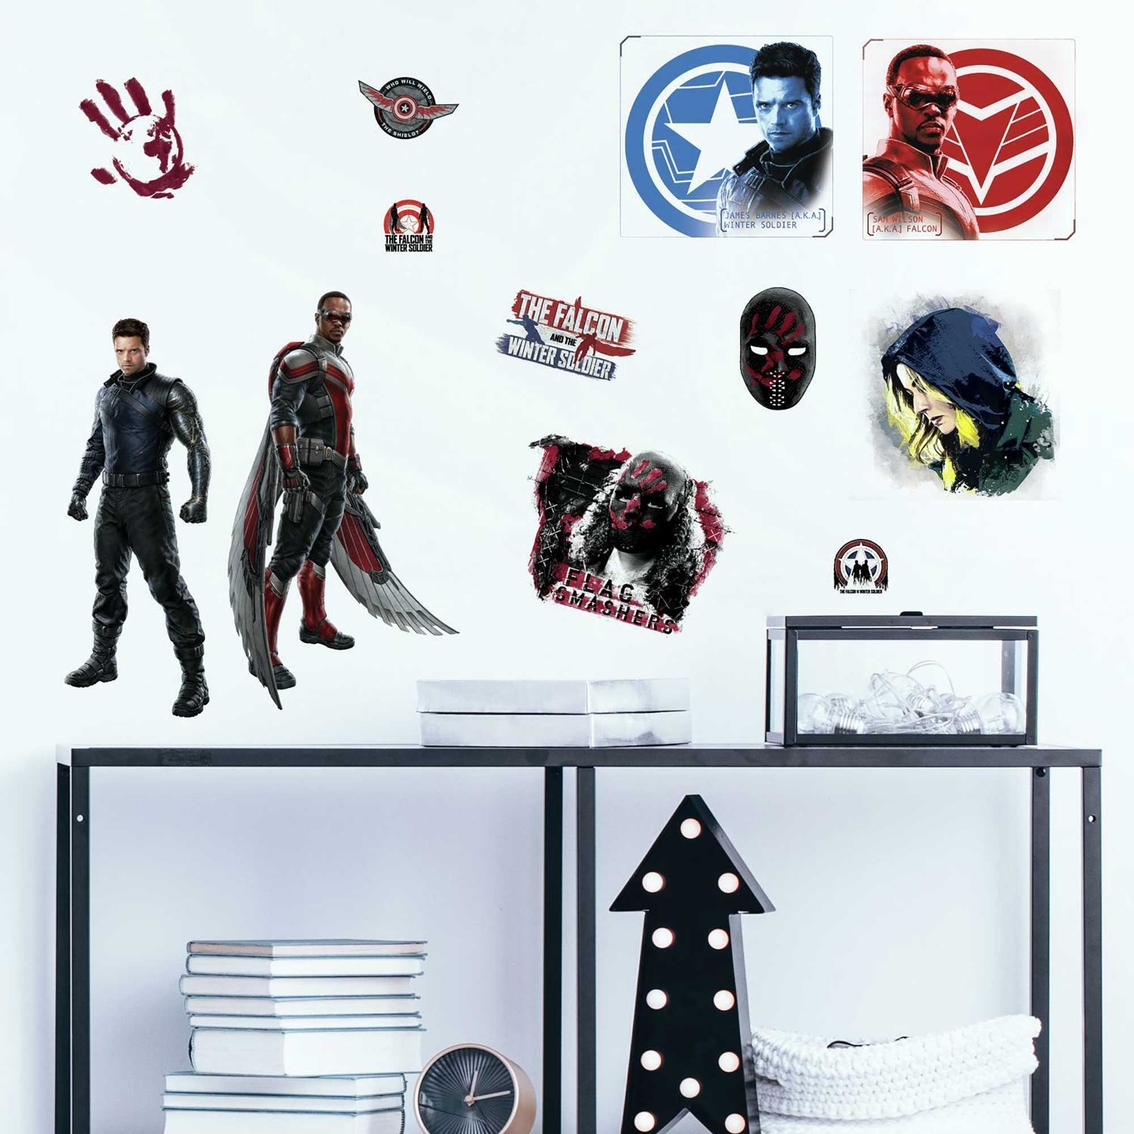 RoomMates Falcon and the Winter Soldier Peel & Stick Wall Decals - Image 3 of 6